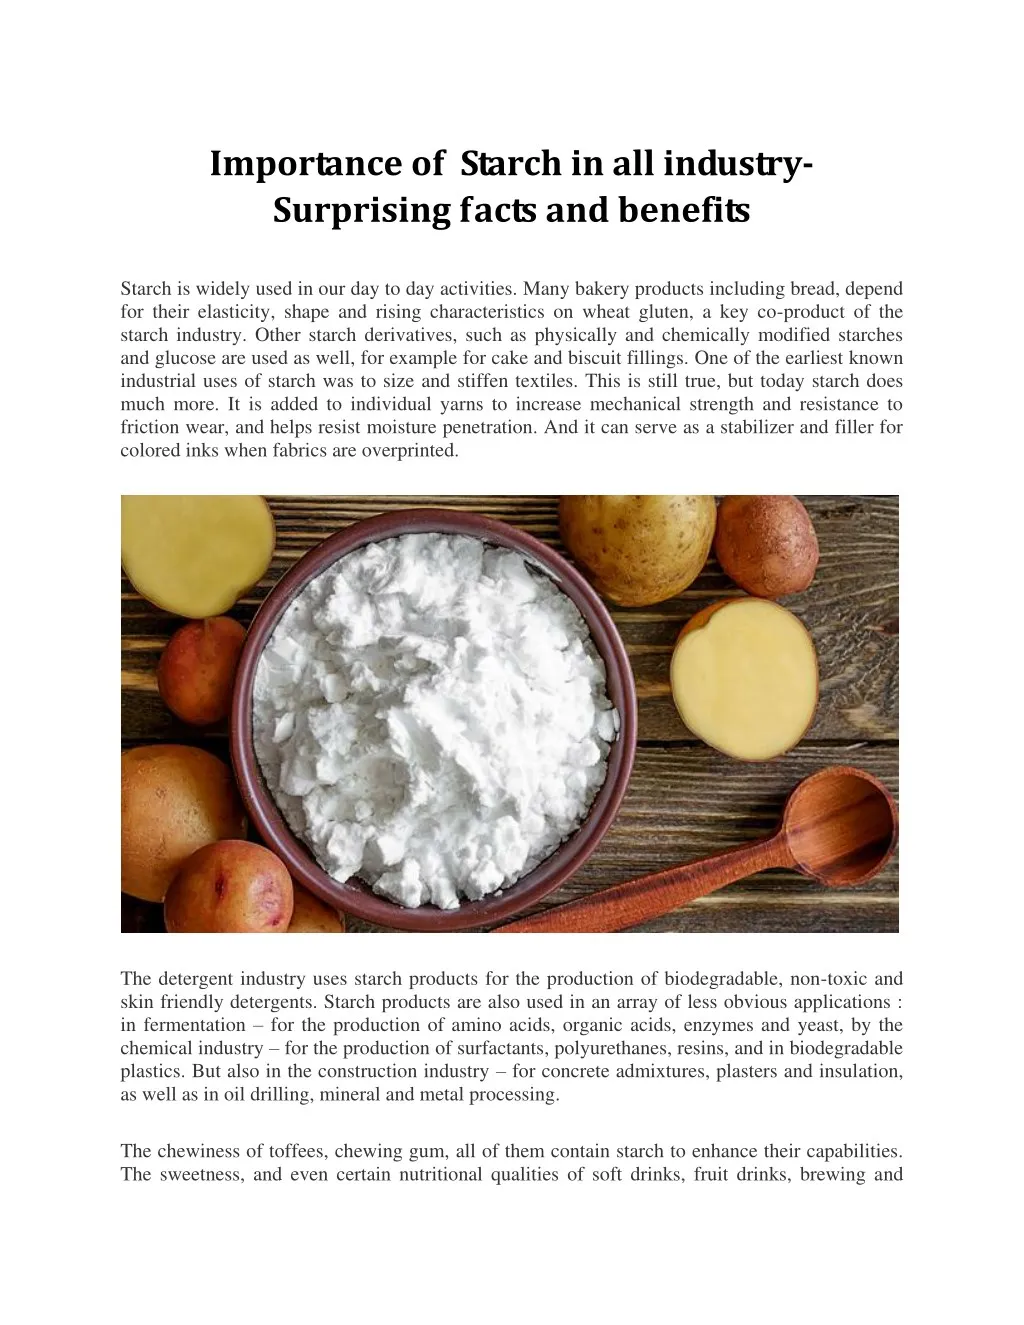 importance of starch in all industry surprising